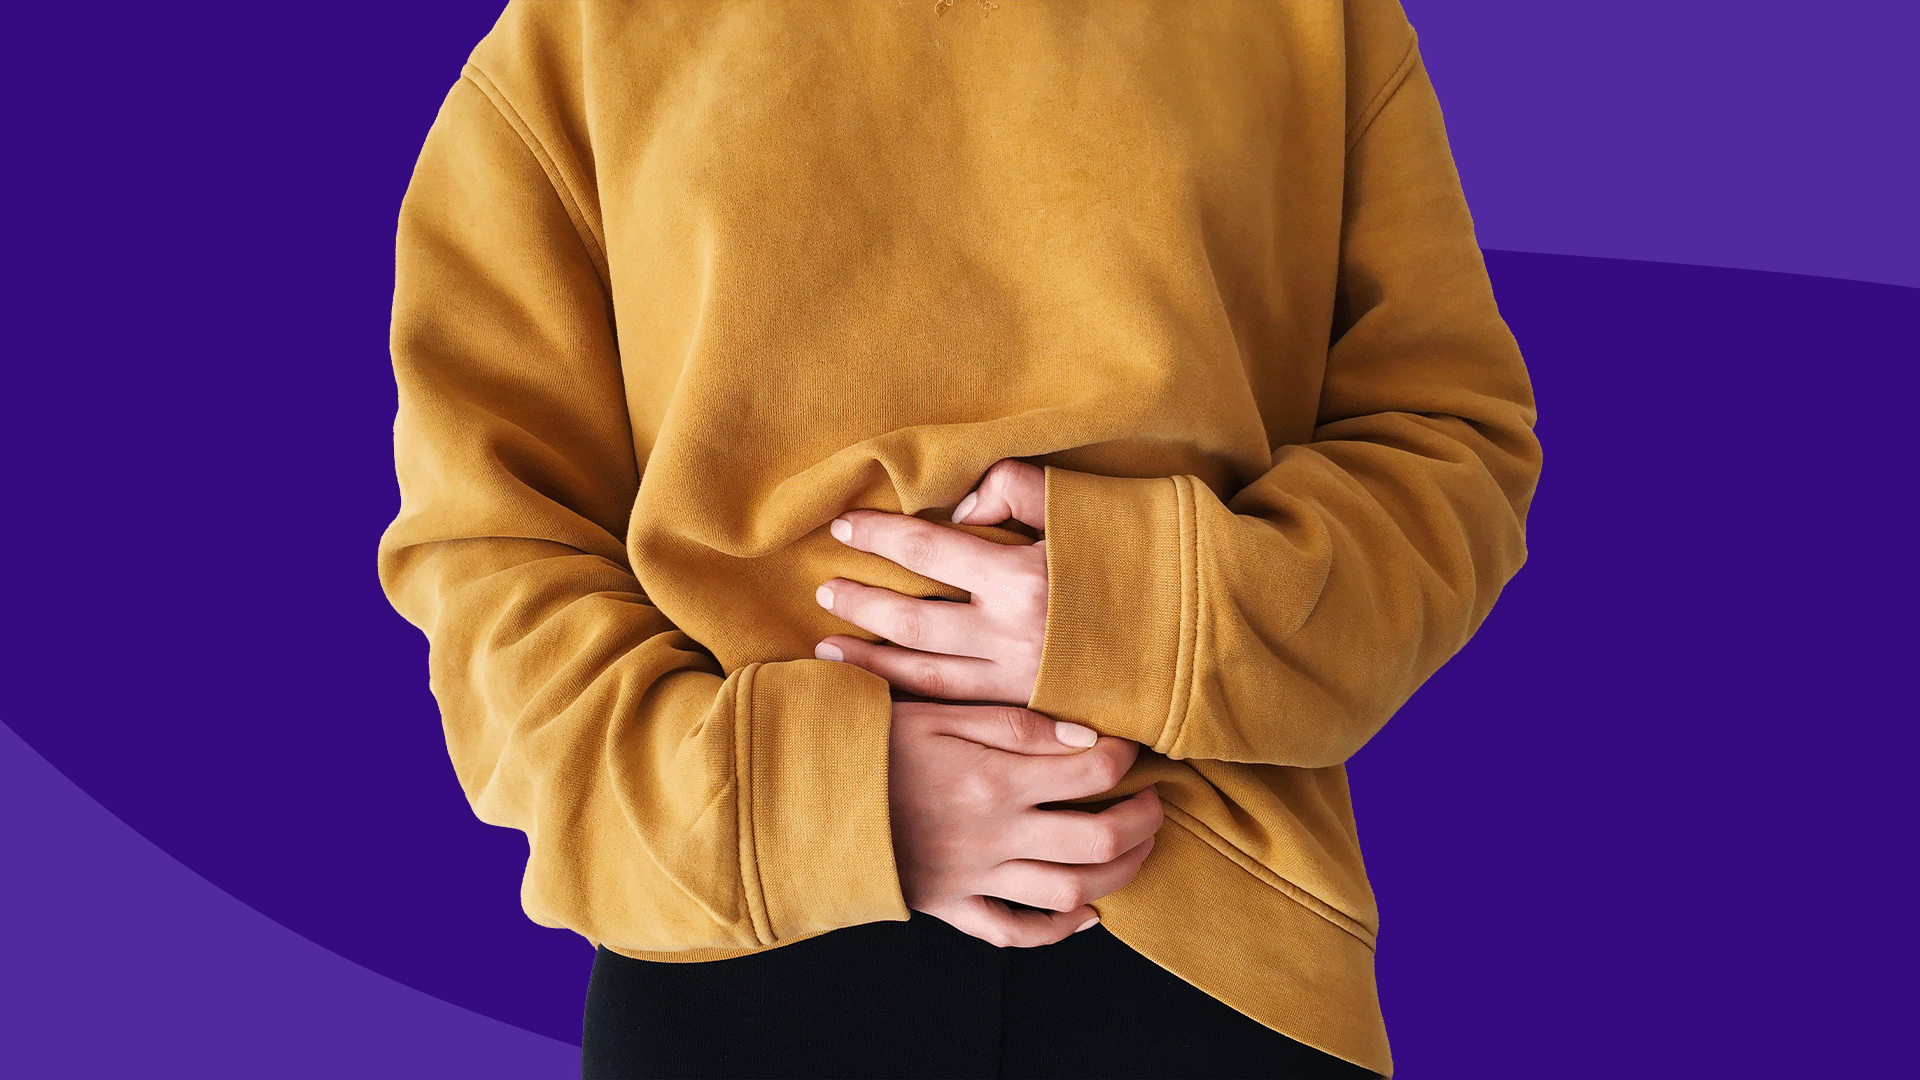 What causes a rash on the stomach? Related conditions and treatments